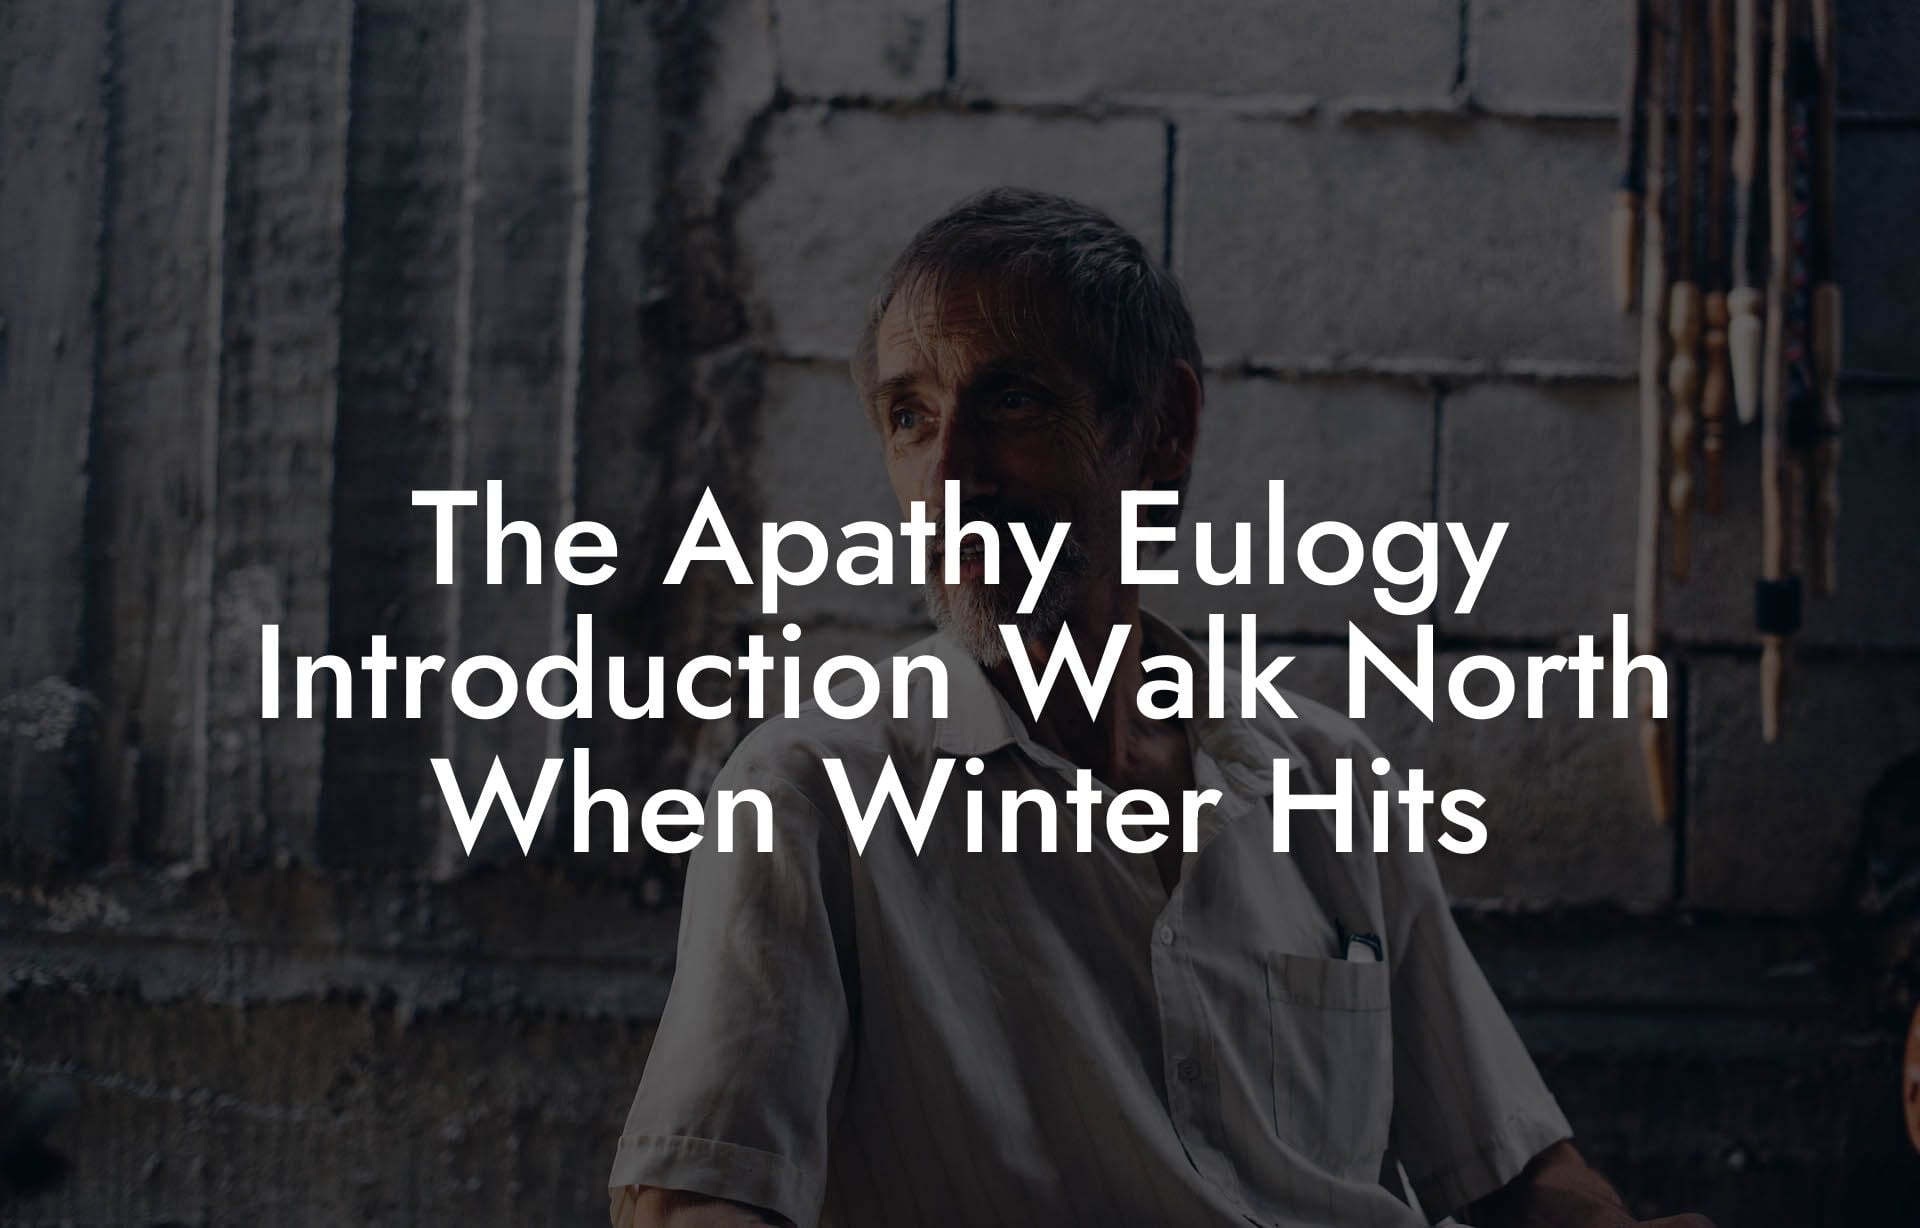 The Apathy Eulogy Introduction Walk North When Winter Hits